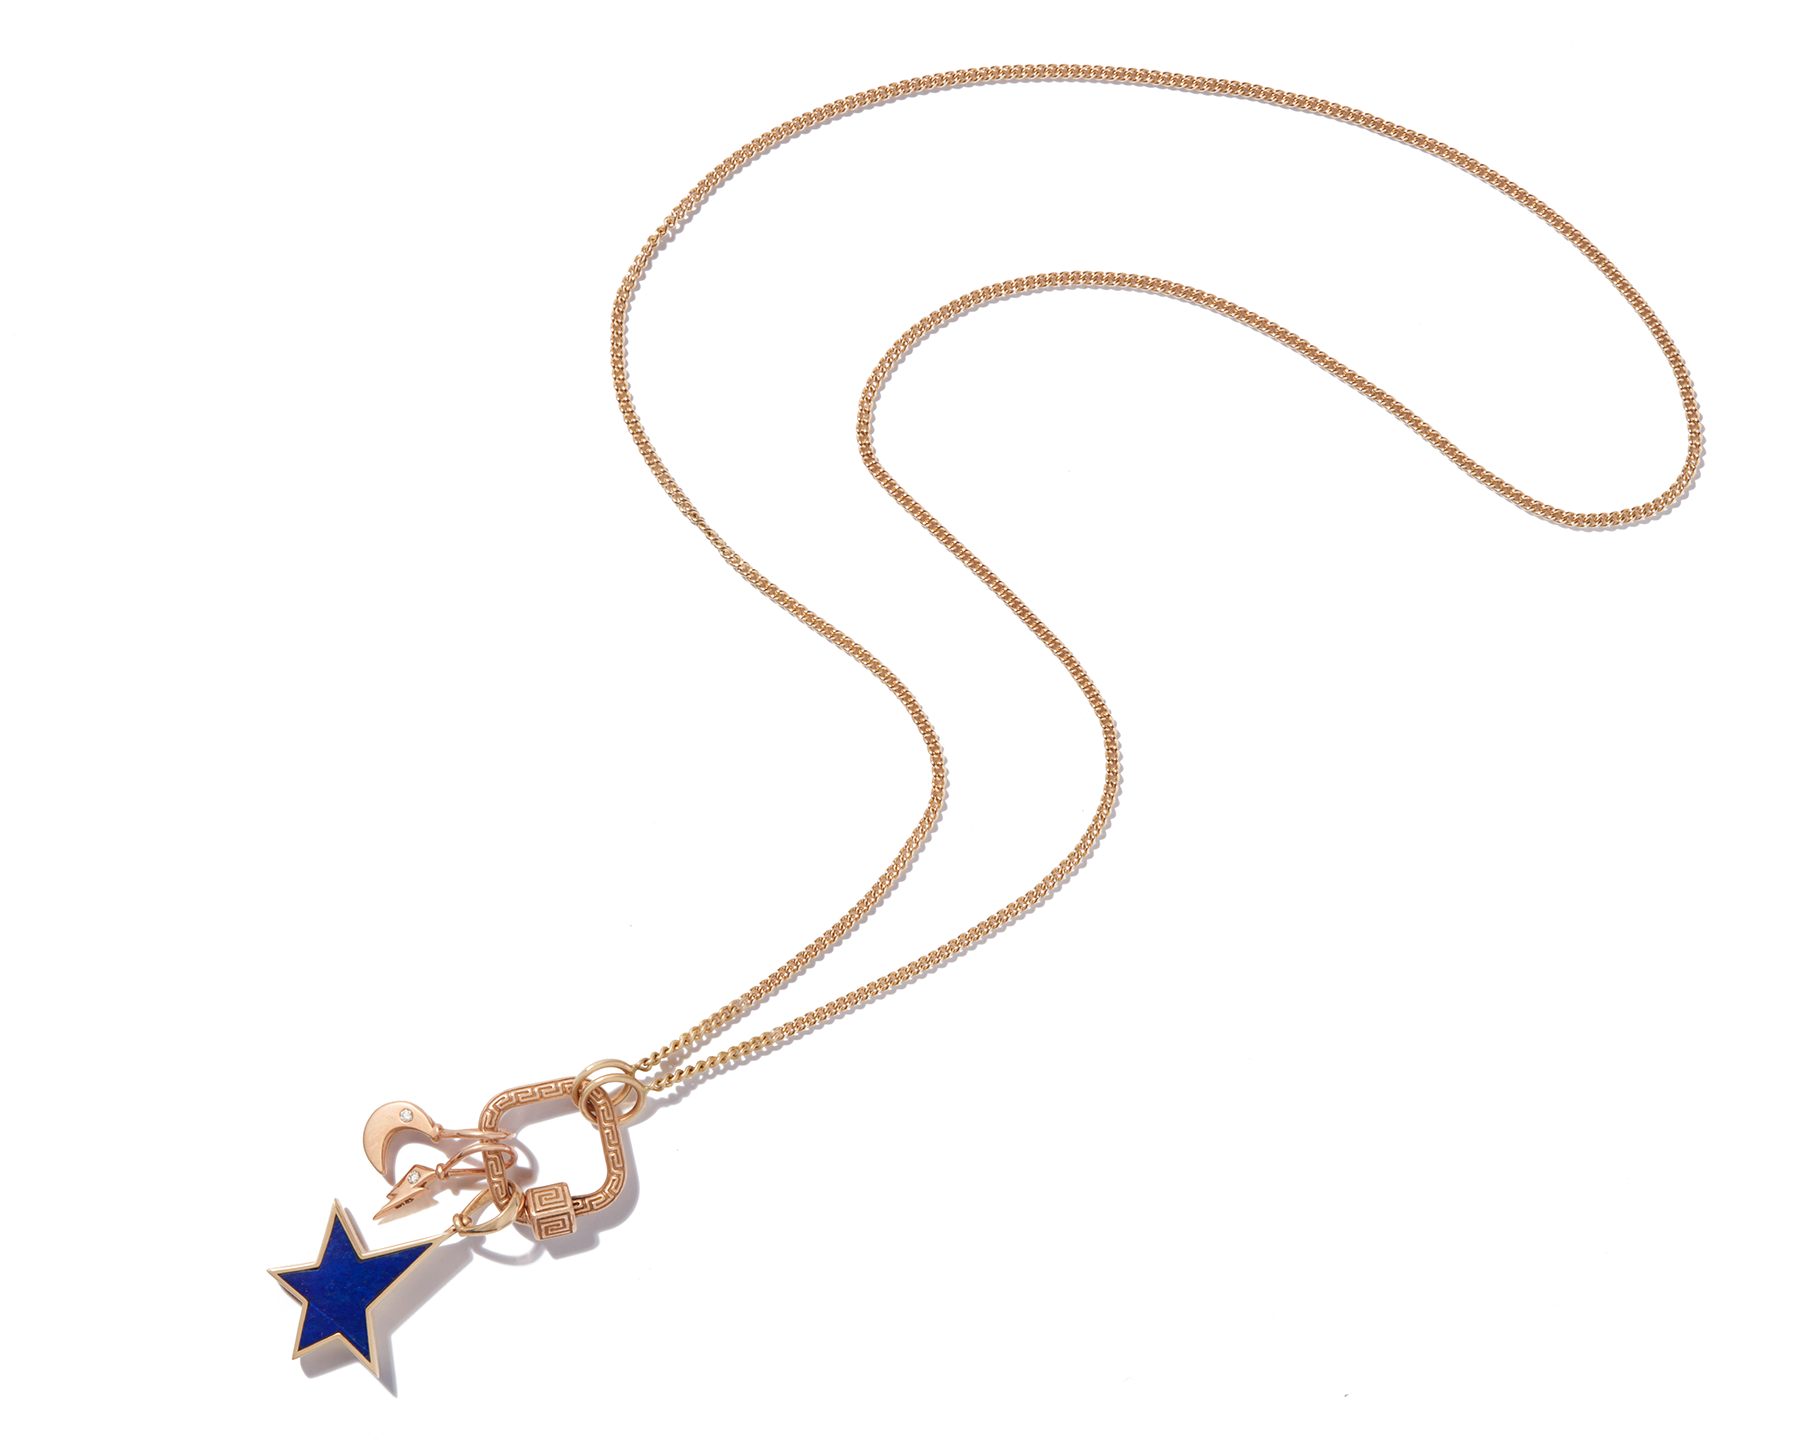 Fine chain gold necklace with blue star charm